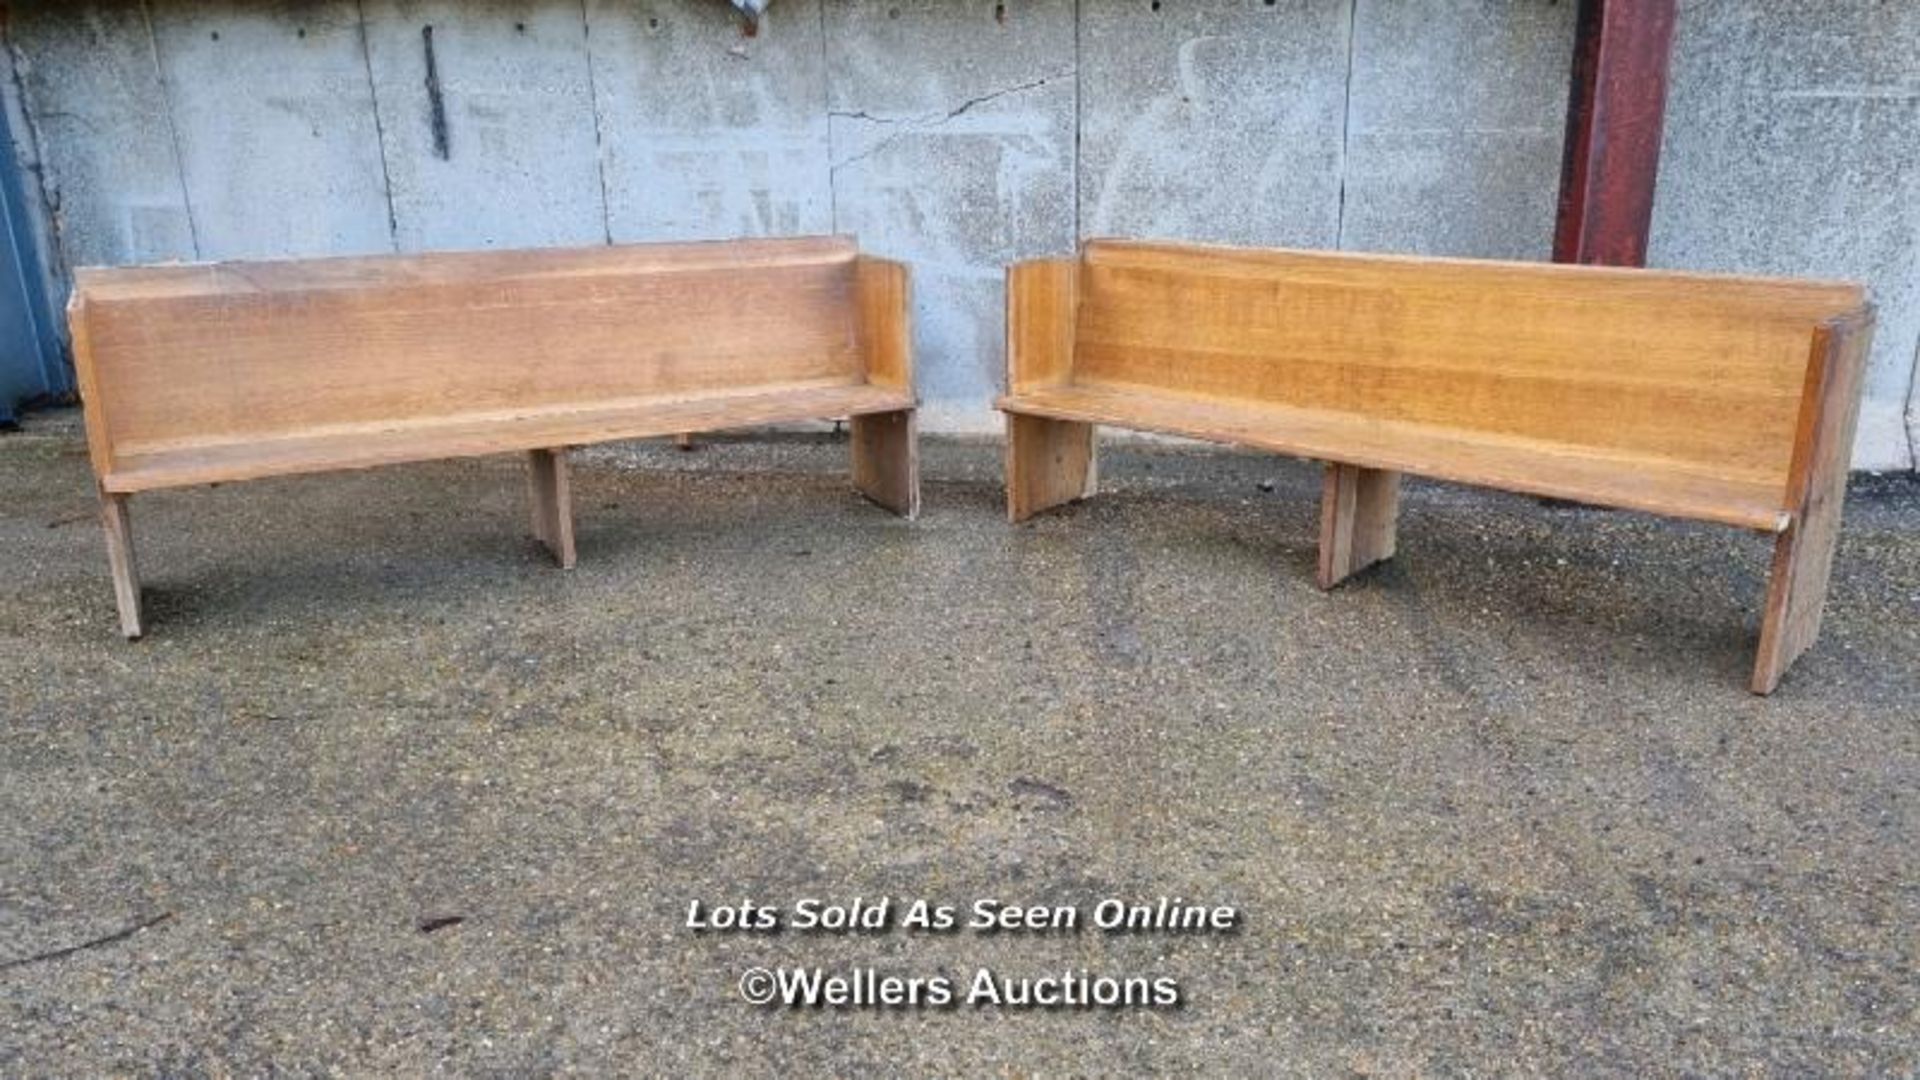 A pair of oak pews. 213cm long, 85cm high and 52cm deep. The seat depth is 36cm so very confortable.